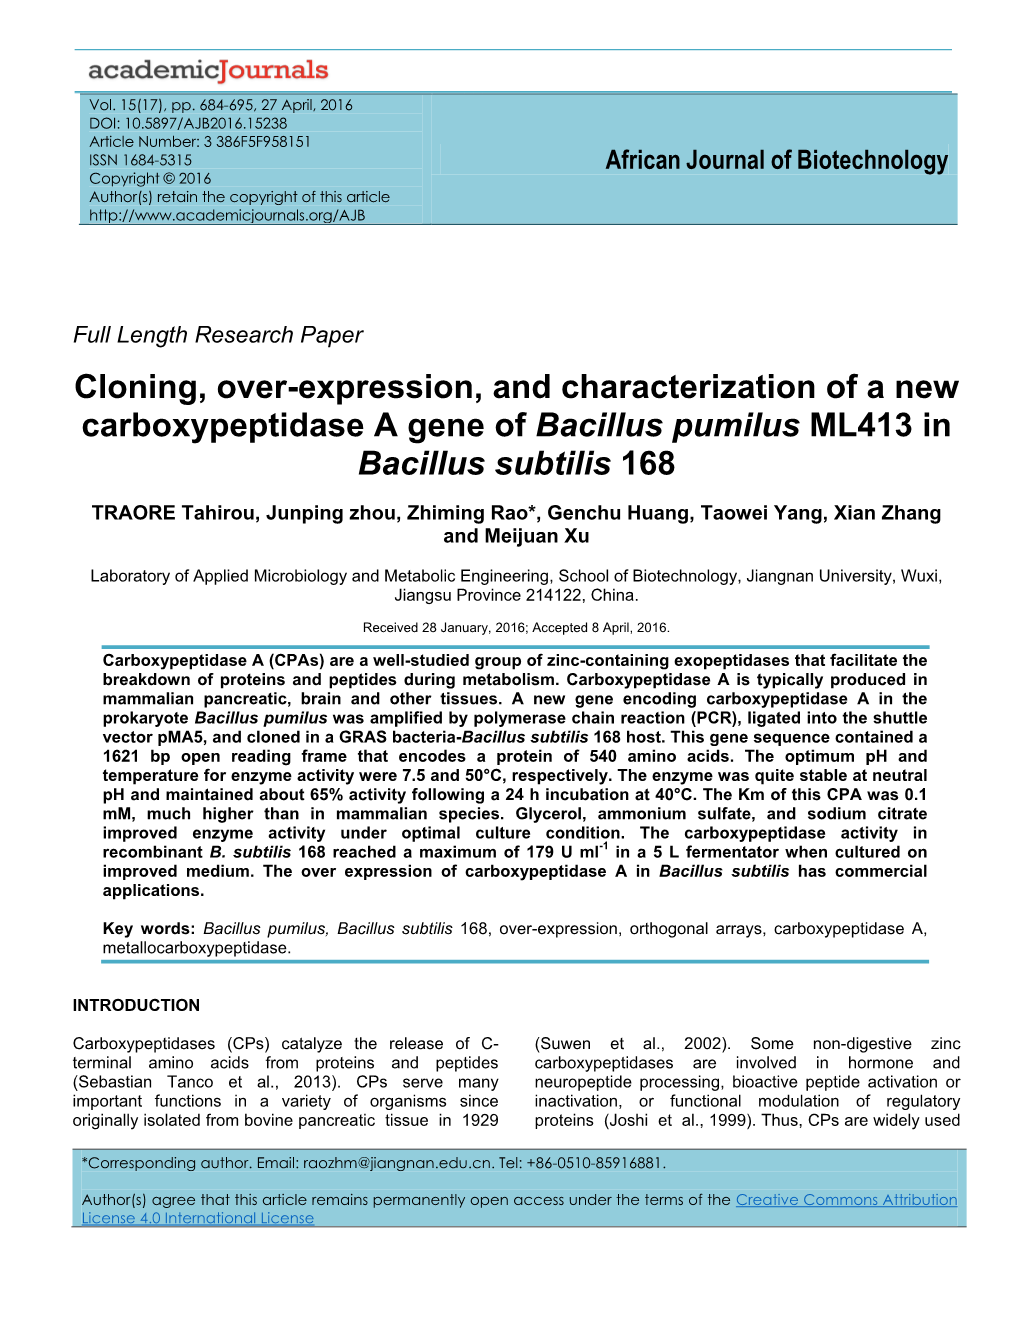 Cloning, Over-Expression, and Characterization of a New Carboxypeptidase a Gene of Bacillus Pumilus ML413 in Bacillus Subtilis 168